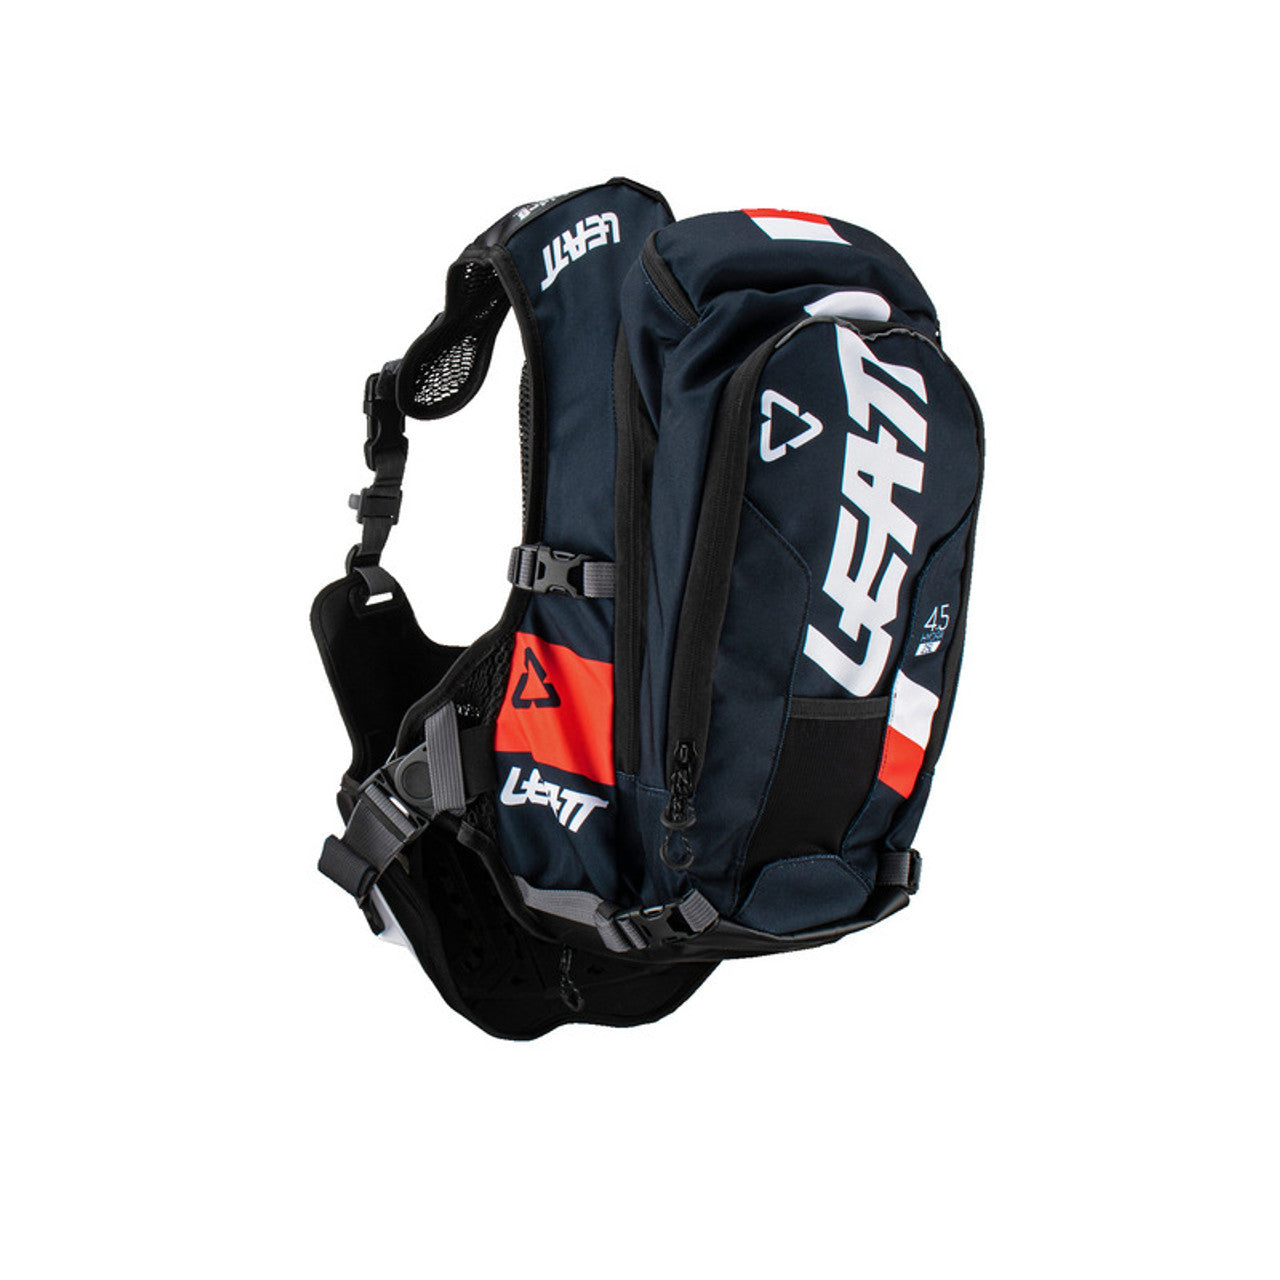 Leatt - Chest Protector + Backpack one piece 4.5 Hydra